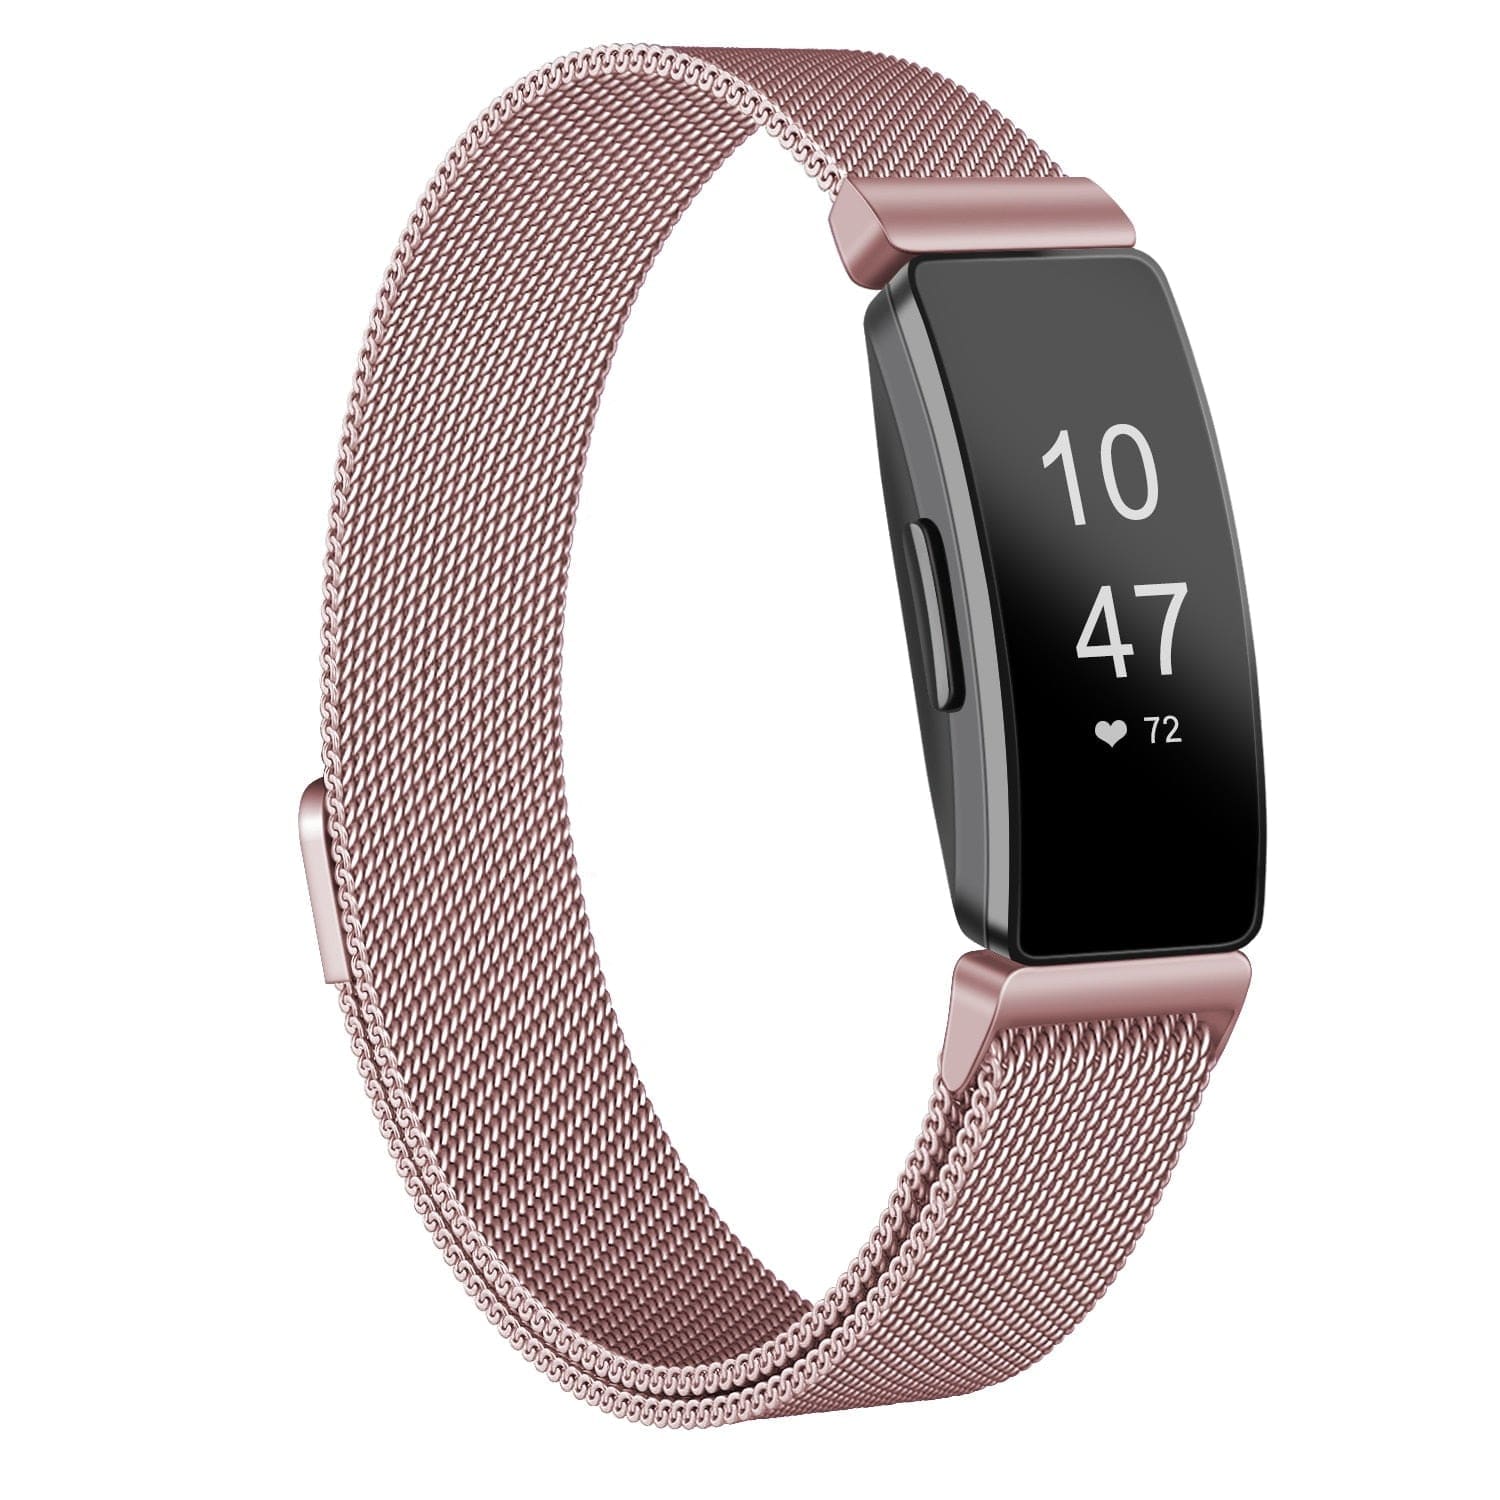 Order the Milanaise bracelet for Fitbit Inspire with free shipping • Loop  Nation